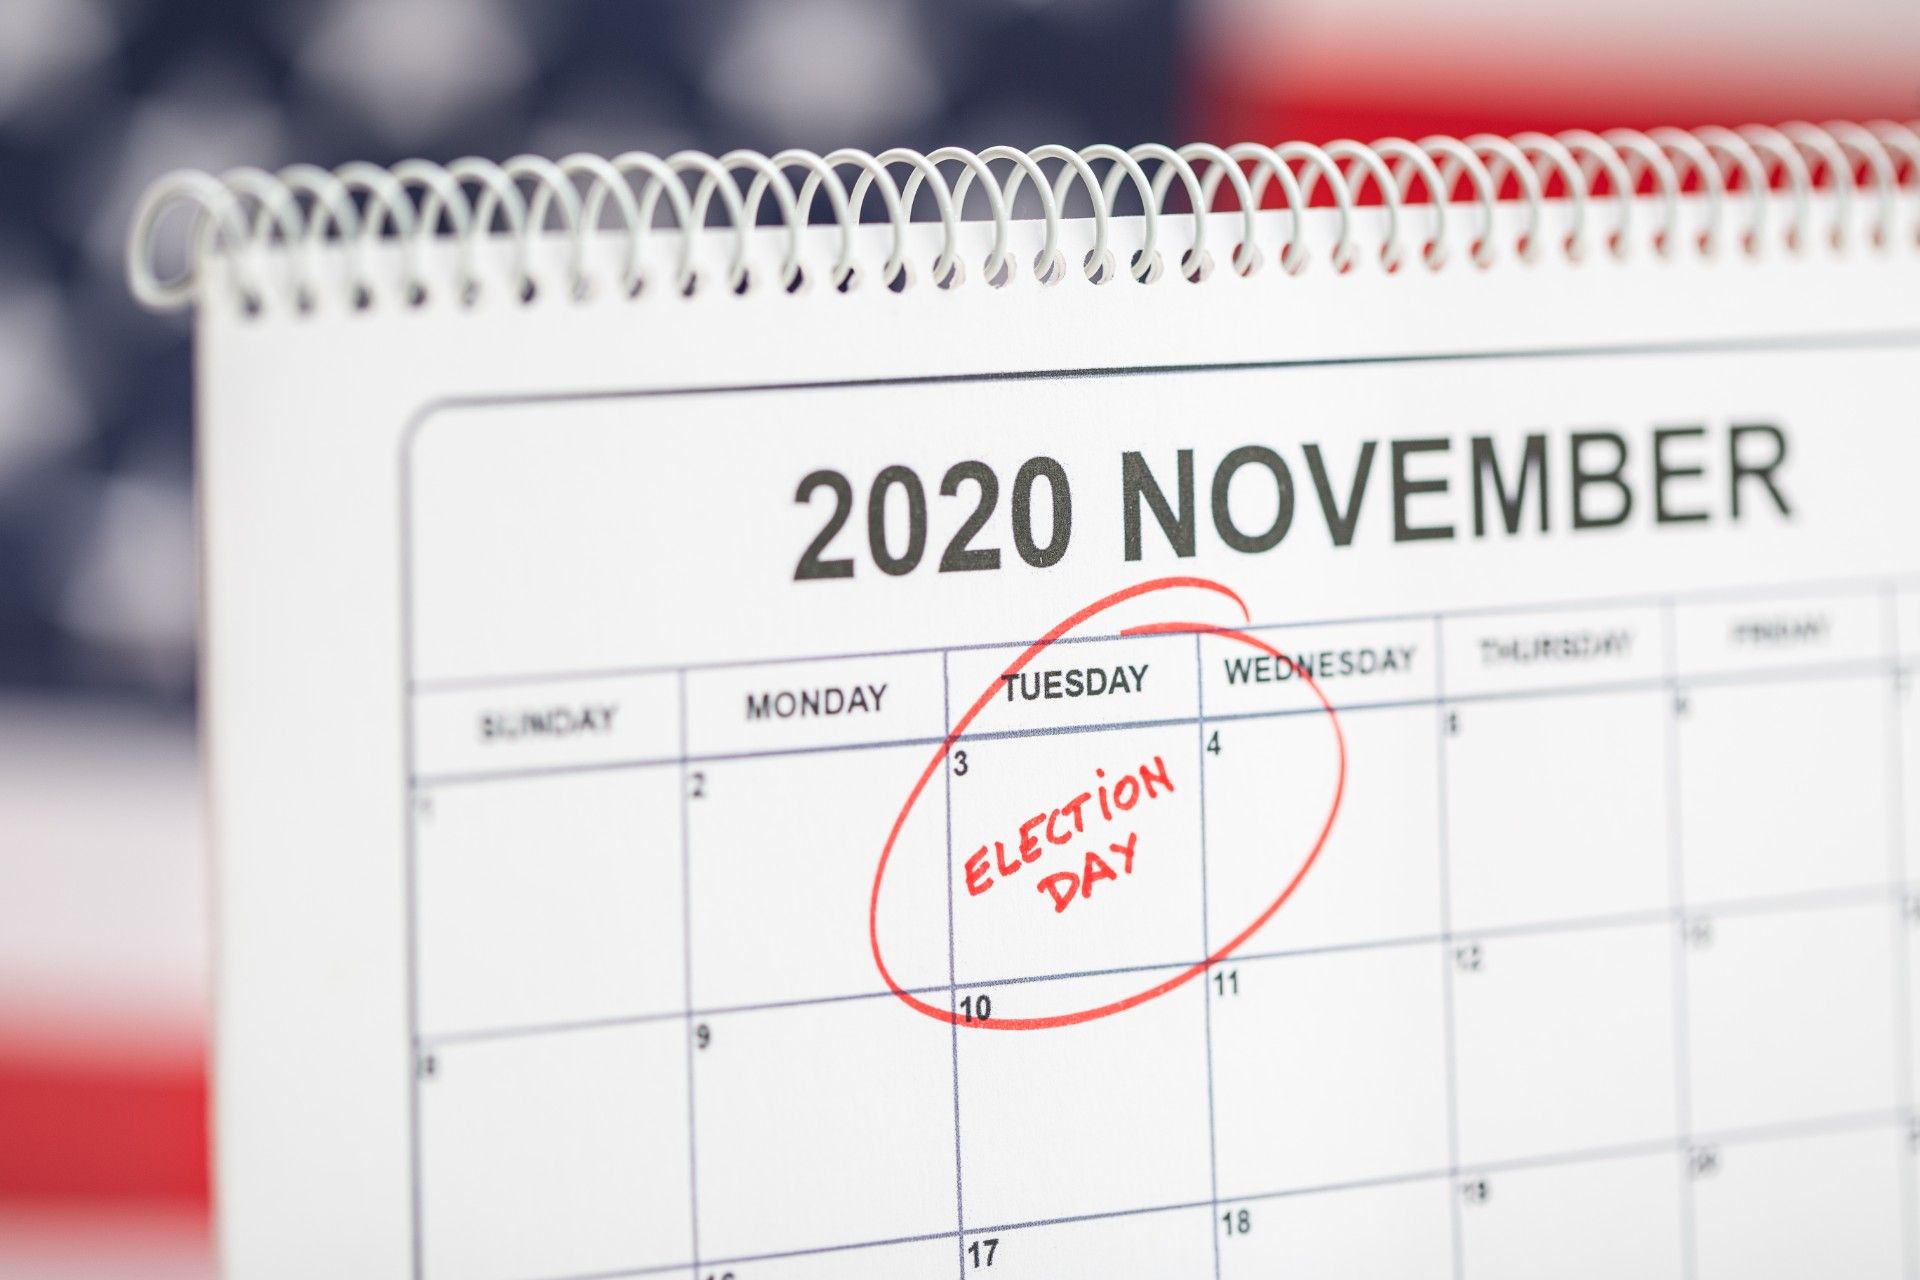 Nov. 3, 2020, is circled in red, with "Election Day" written inside the circle - election grants